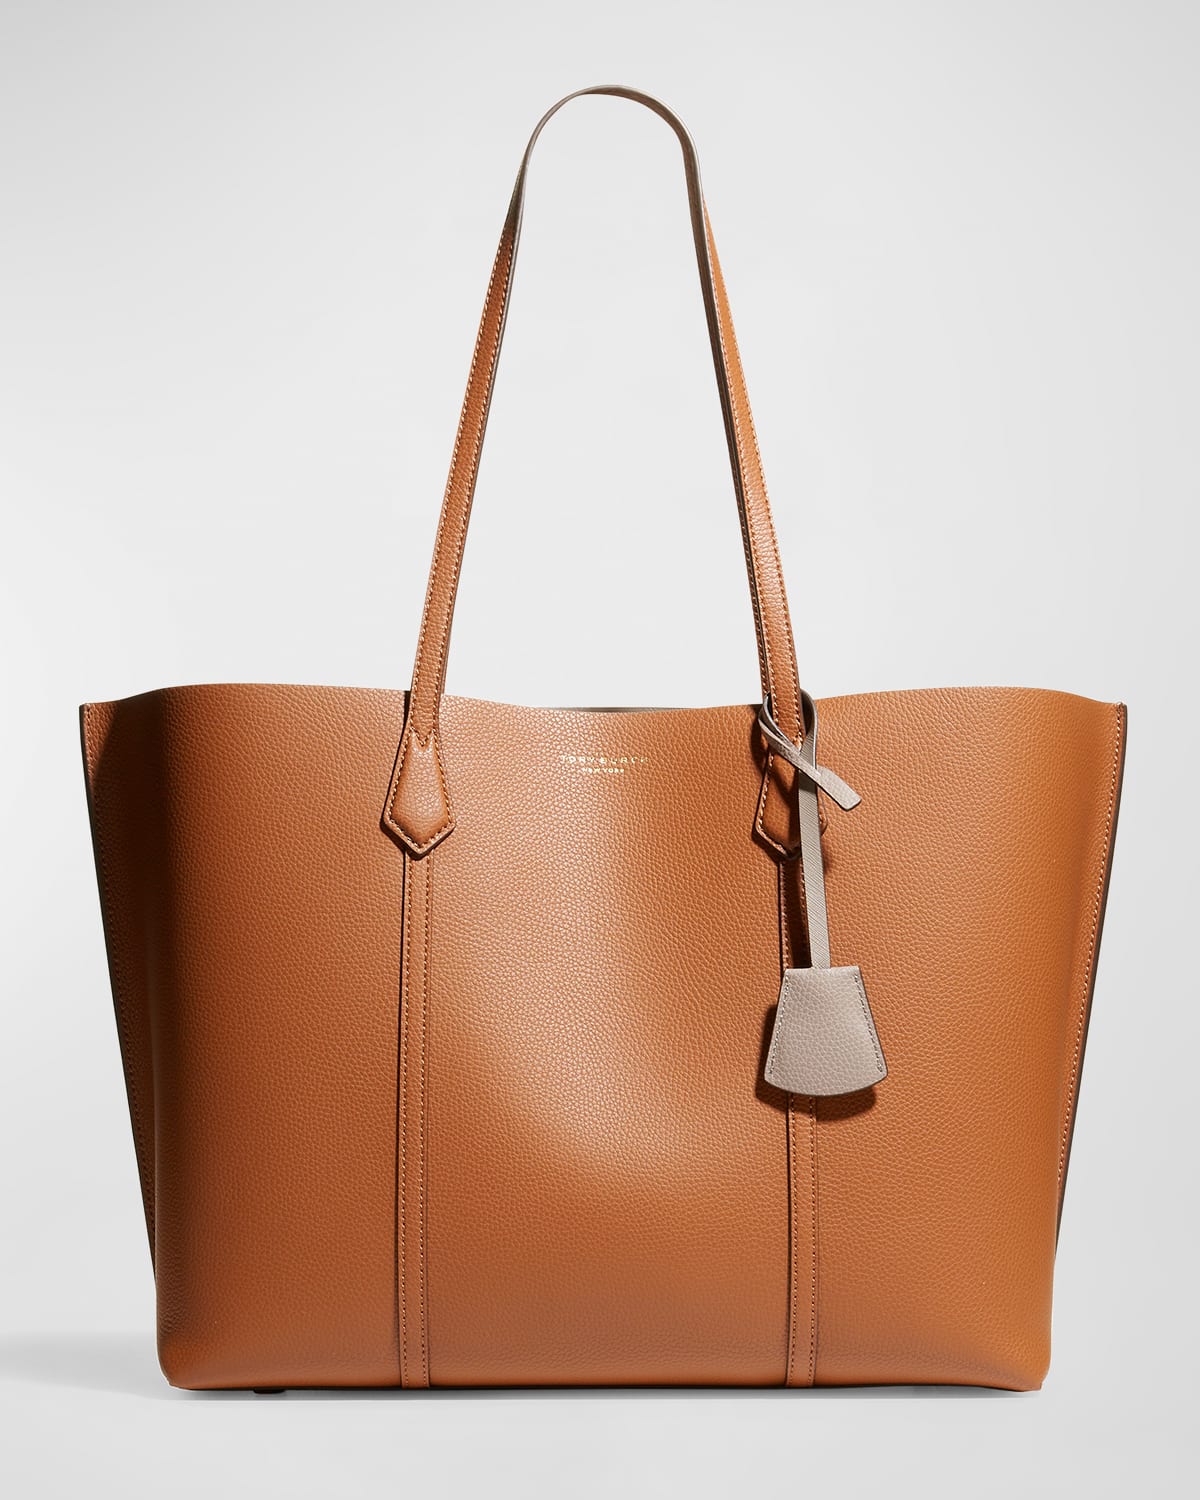 Tory Burch Perry Leather Shopper Tote Bag In Light Umber